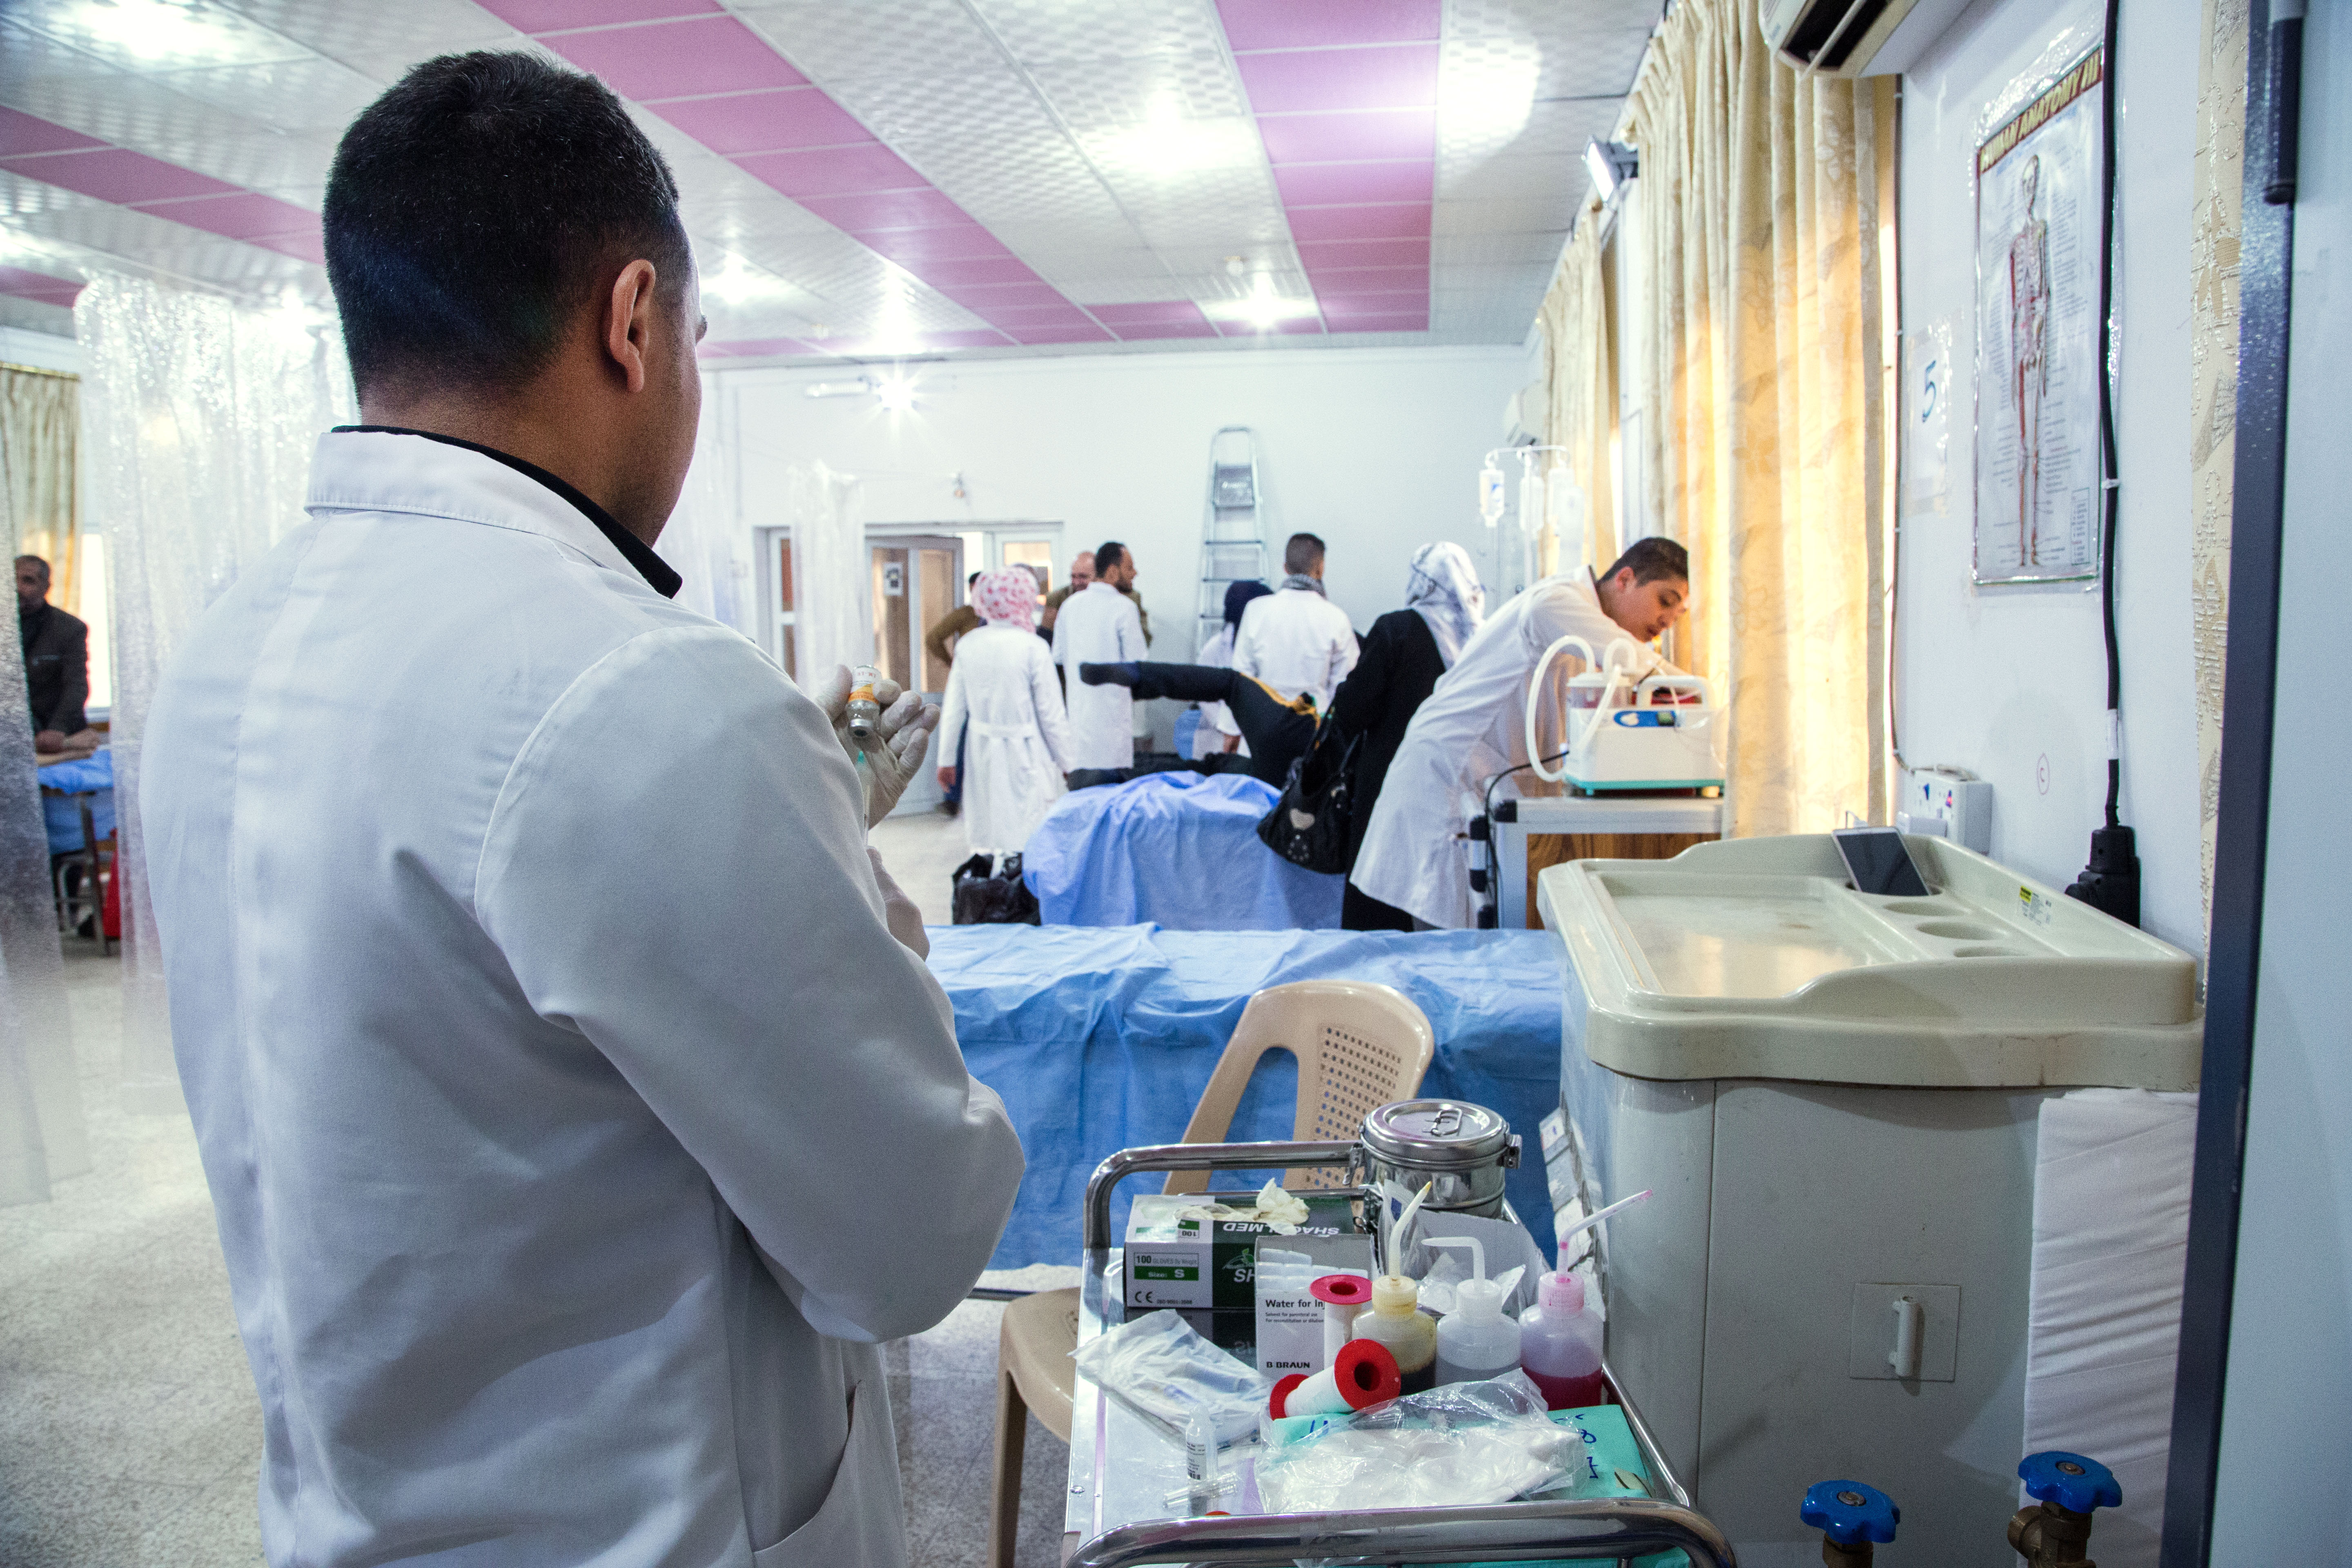 MSF teams in and around Mosul have received more than 1,800 patients in need of urgent or lifesaving care in the last two months. 1,500 of them needed treatment for conflict related trauma. As the scale of the non-trauma needs also became apparent, MSF opened maternity services in eastern Mosul at the beginning of February, and since then the teams have assisted 100 births and performed 80 C-sections.